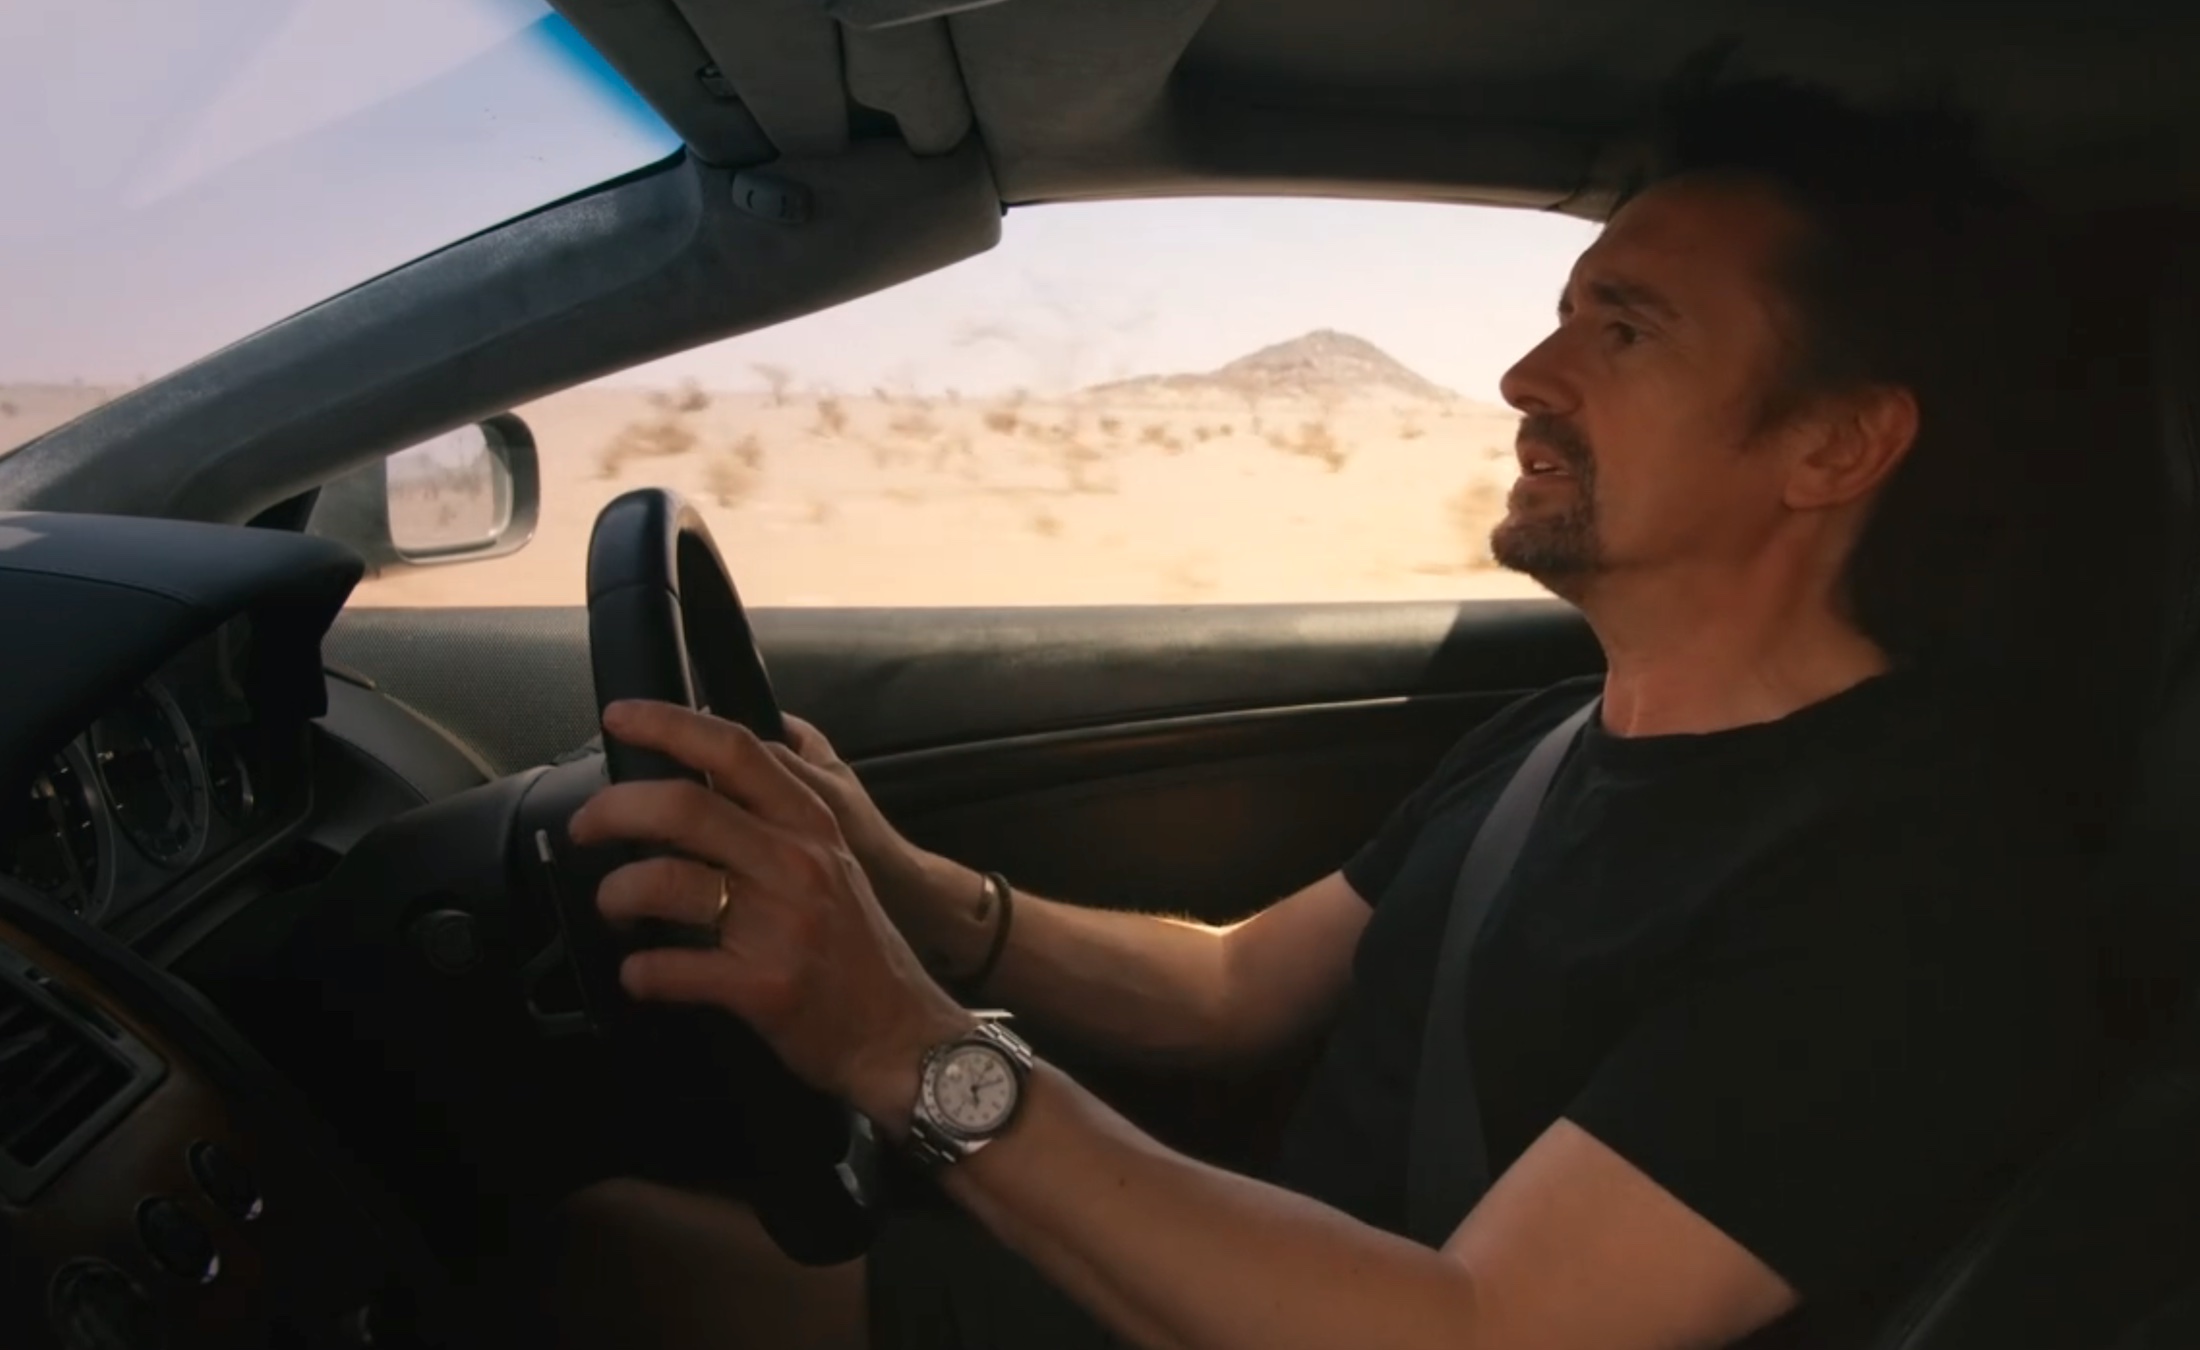 Spotted - Rolex, Omega, G-Shock - The Watches of The Grand Tour Sand Job - Clarkson Hammond May